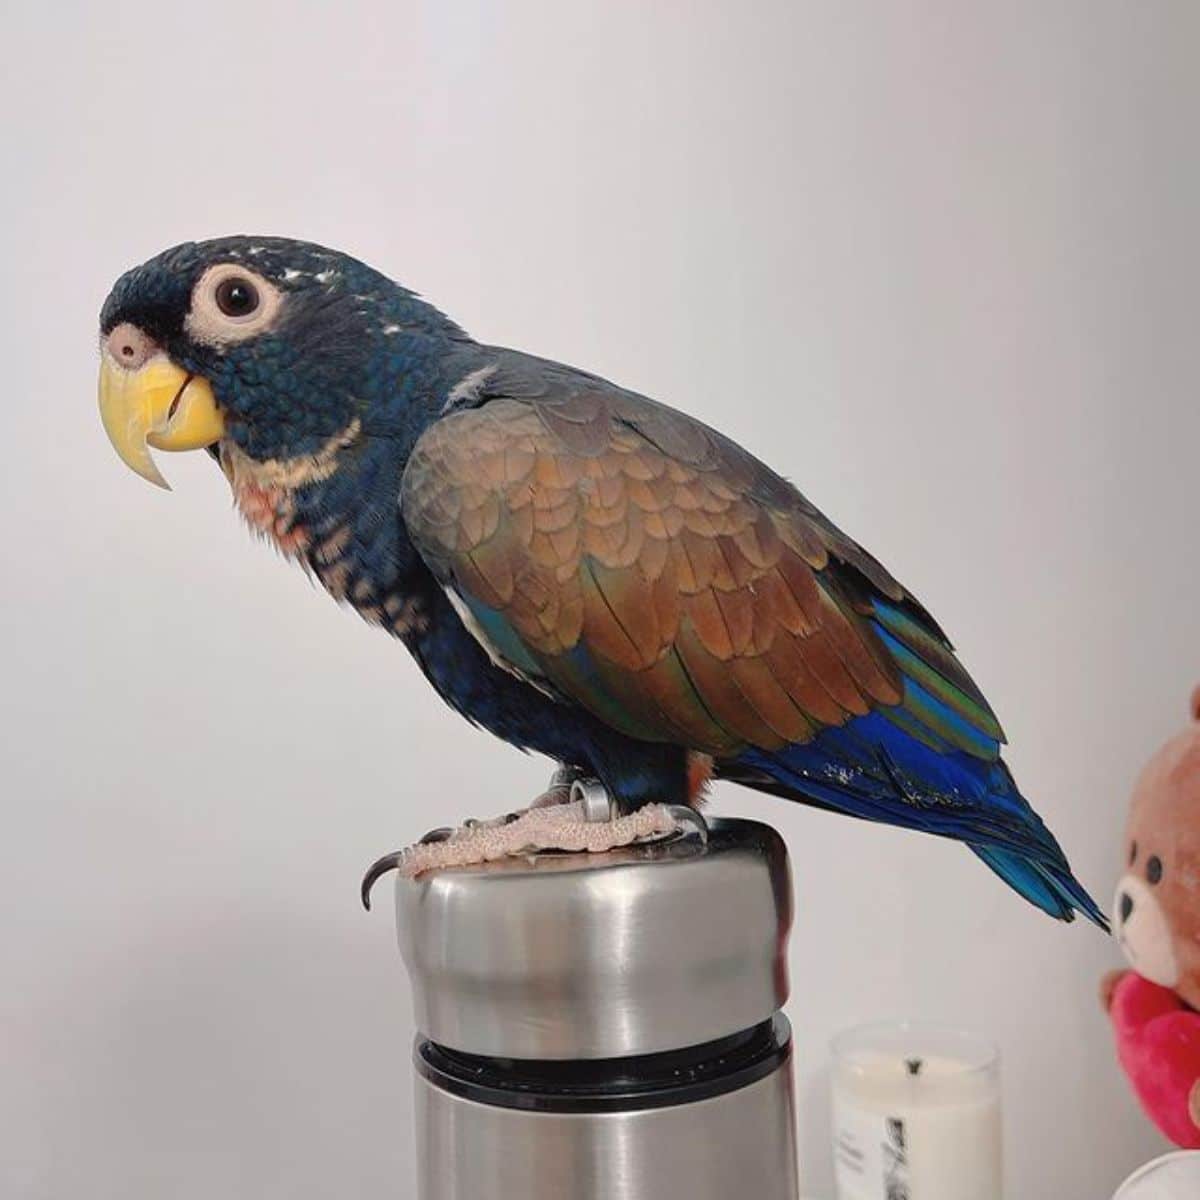 An adorable Pionus Parrot perched on a thermal flask.